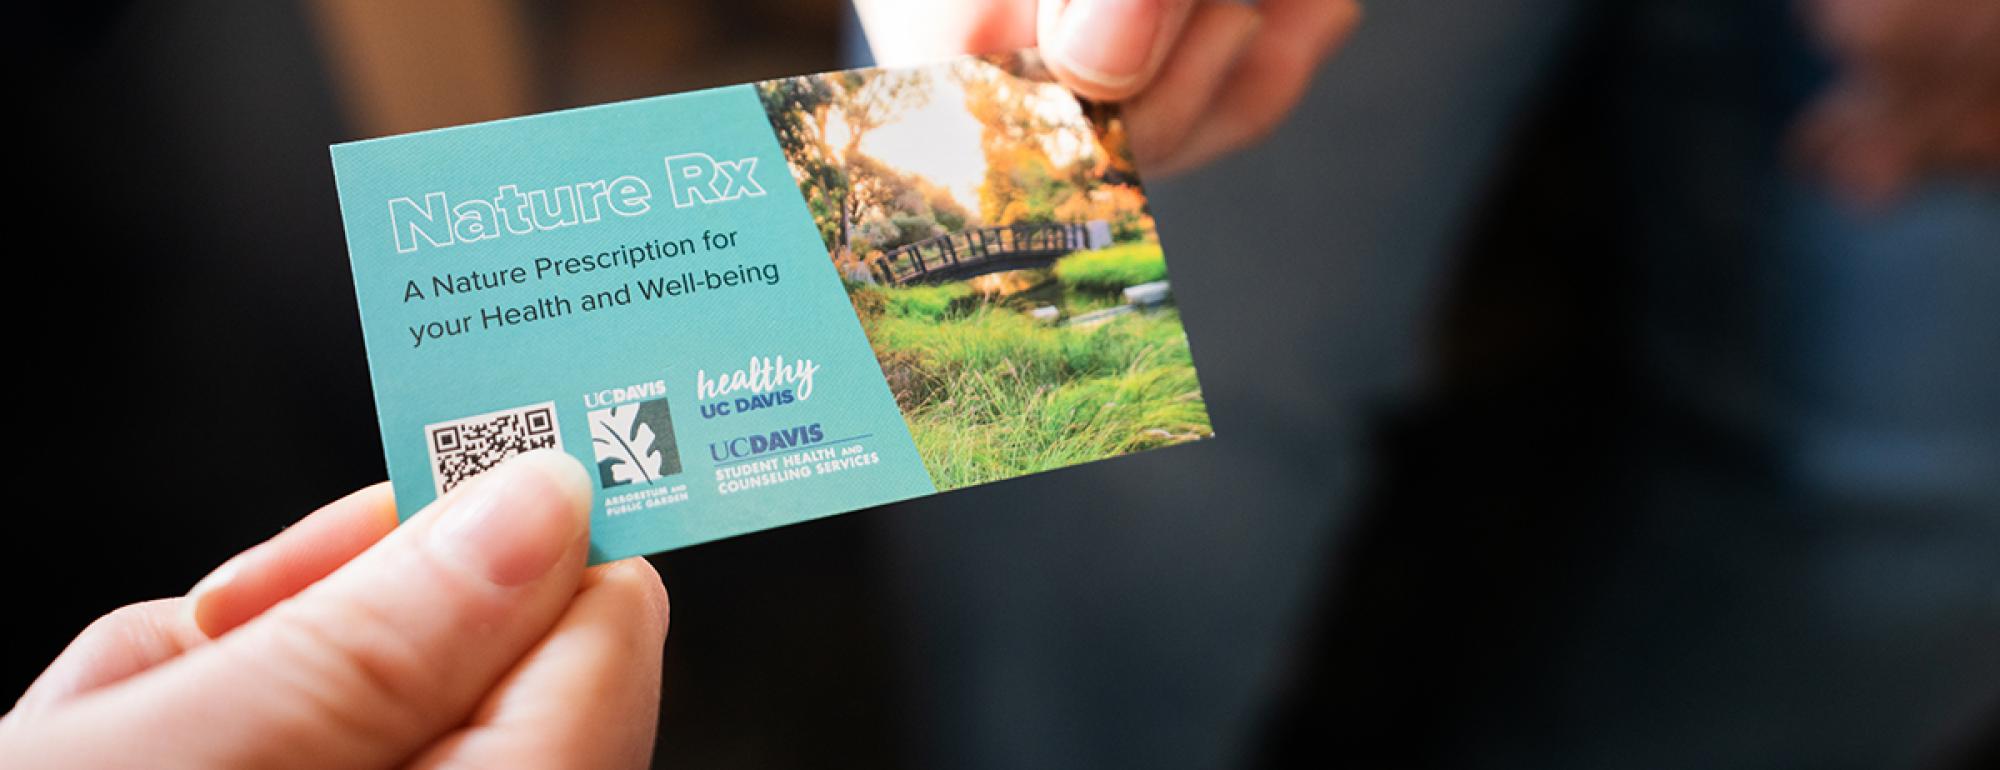 Image of a hand giving another hand a business-type card with a beautiful outdoor image of a bridge in the UC Davis Arboretum and includes the copy:  Nature Rx A Nature Prescription for your Health and Well-being. The card includes a QR code and wordmarks from the participating partners including the UC Davis Arboretum and Public Garden, Healthy UC Davis, and UC Davis Health and Counseling Services.